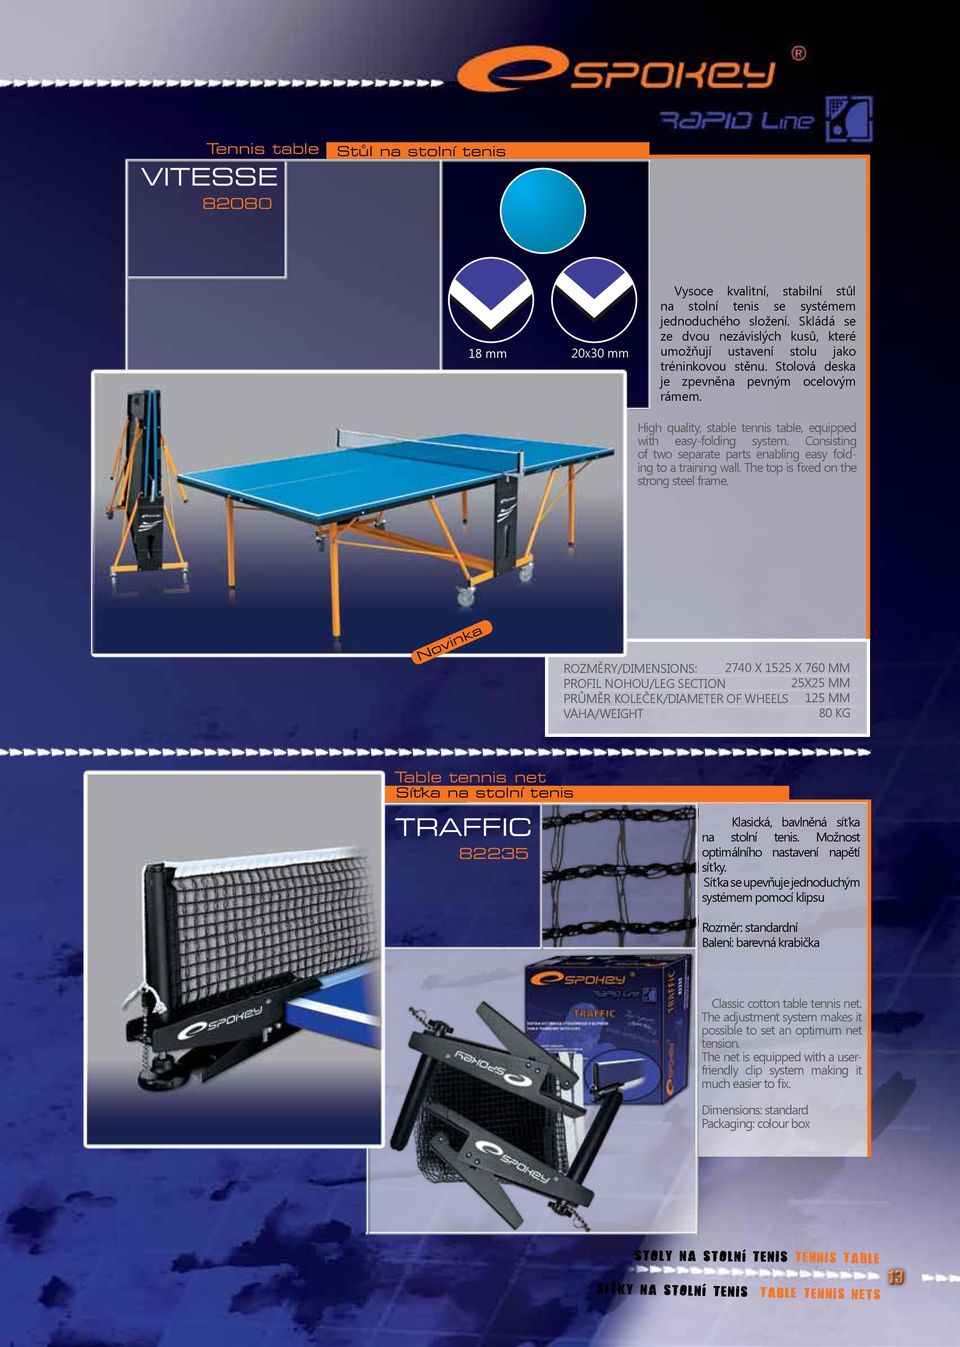 High quality, stable tennis table, equipped with easy-folding system. Consisting of two separate parts enabling easy folding to a training wall. The top is fixed on the strong steel frame.